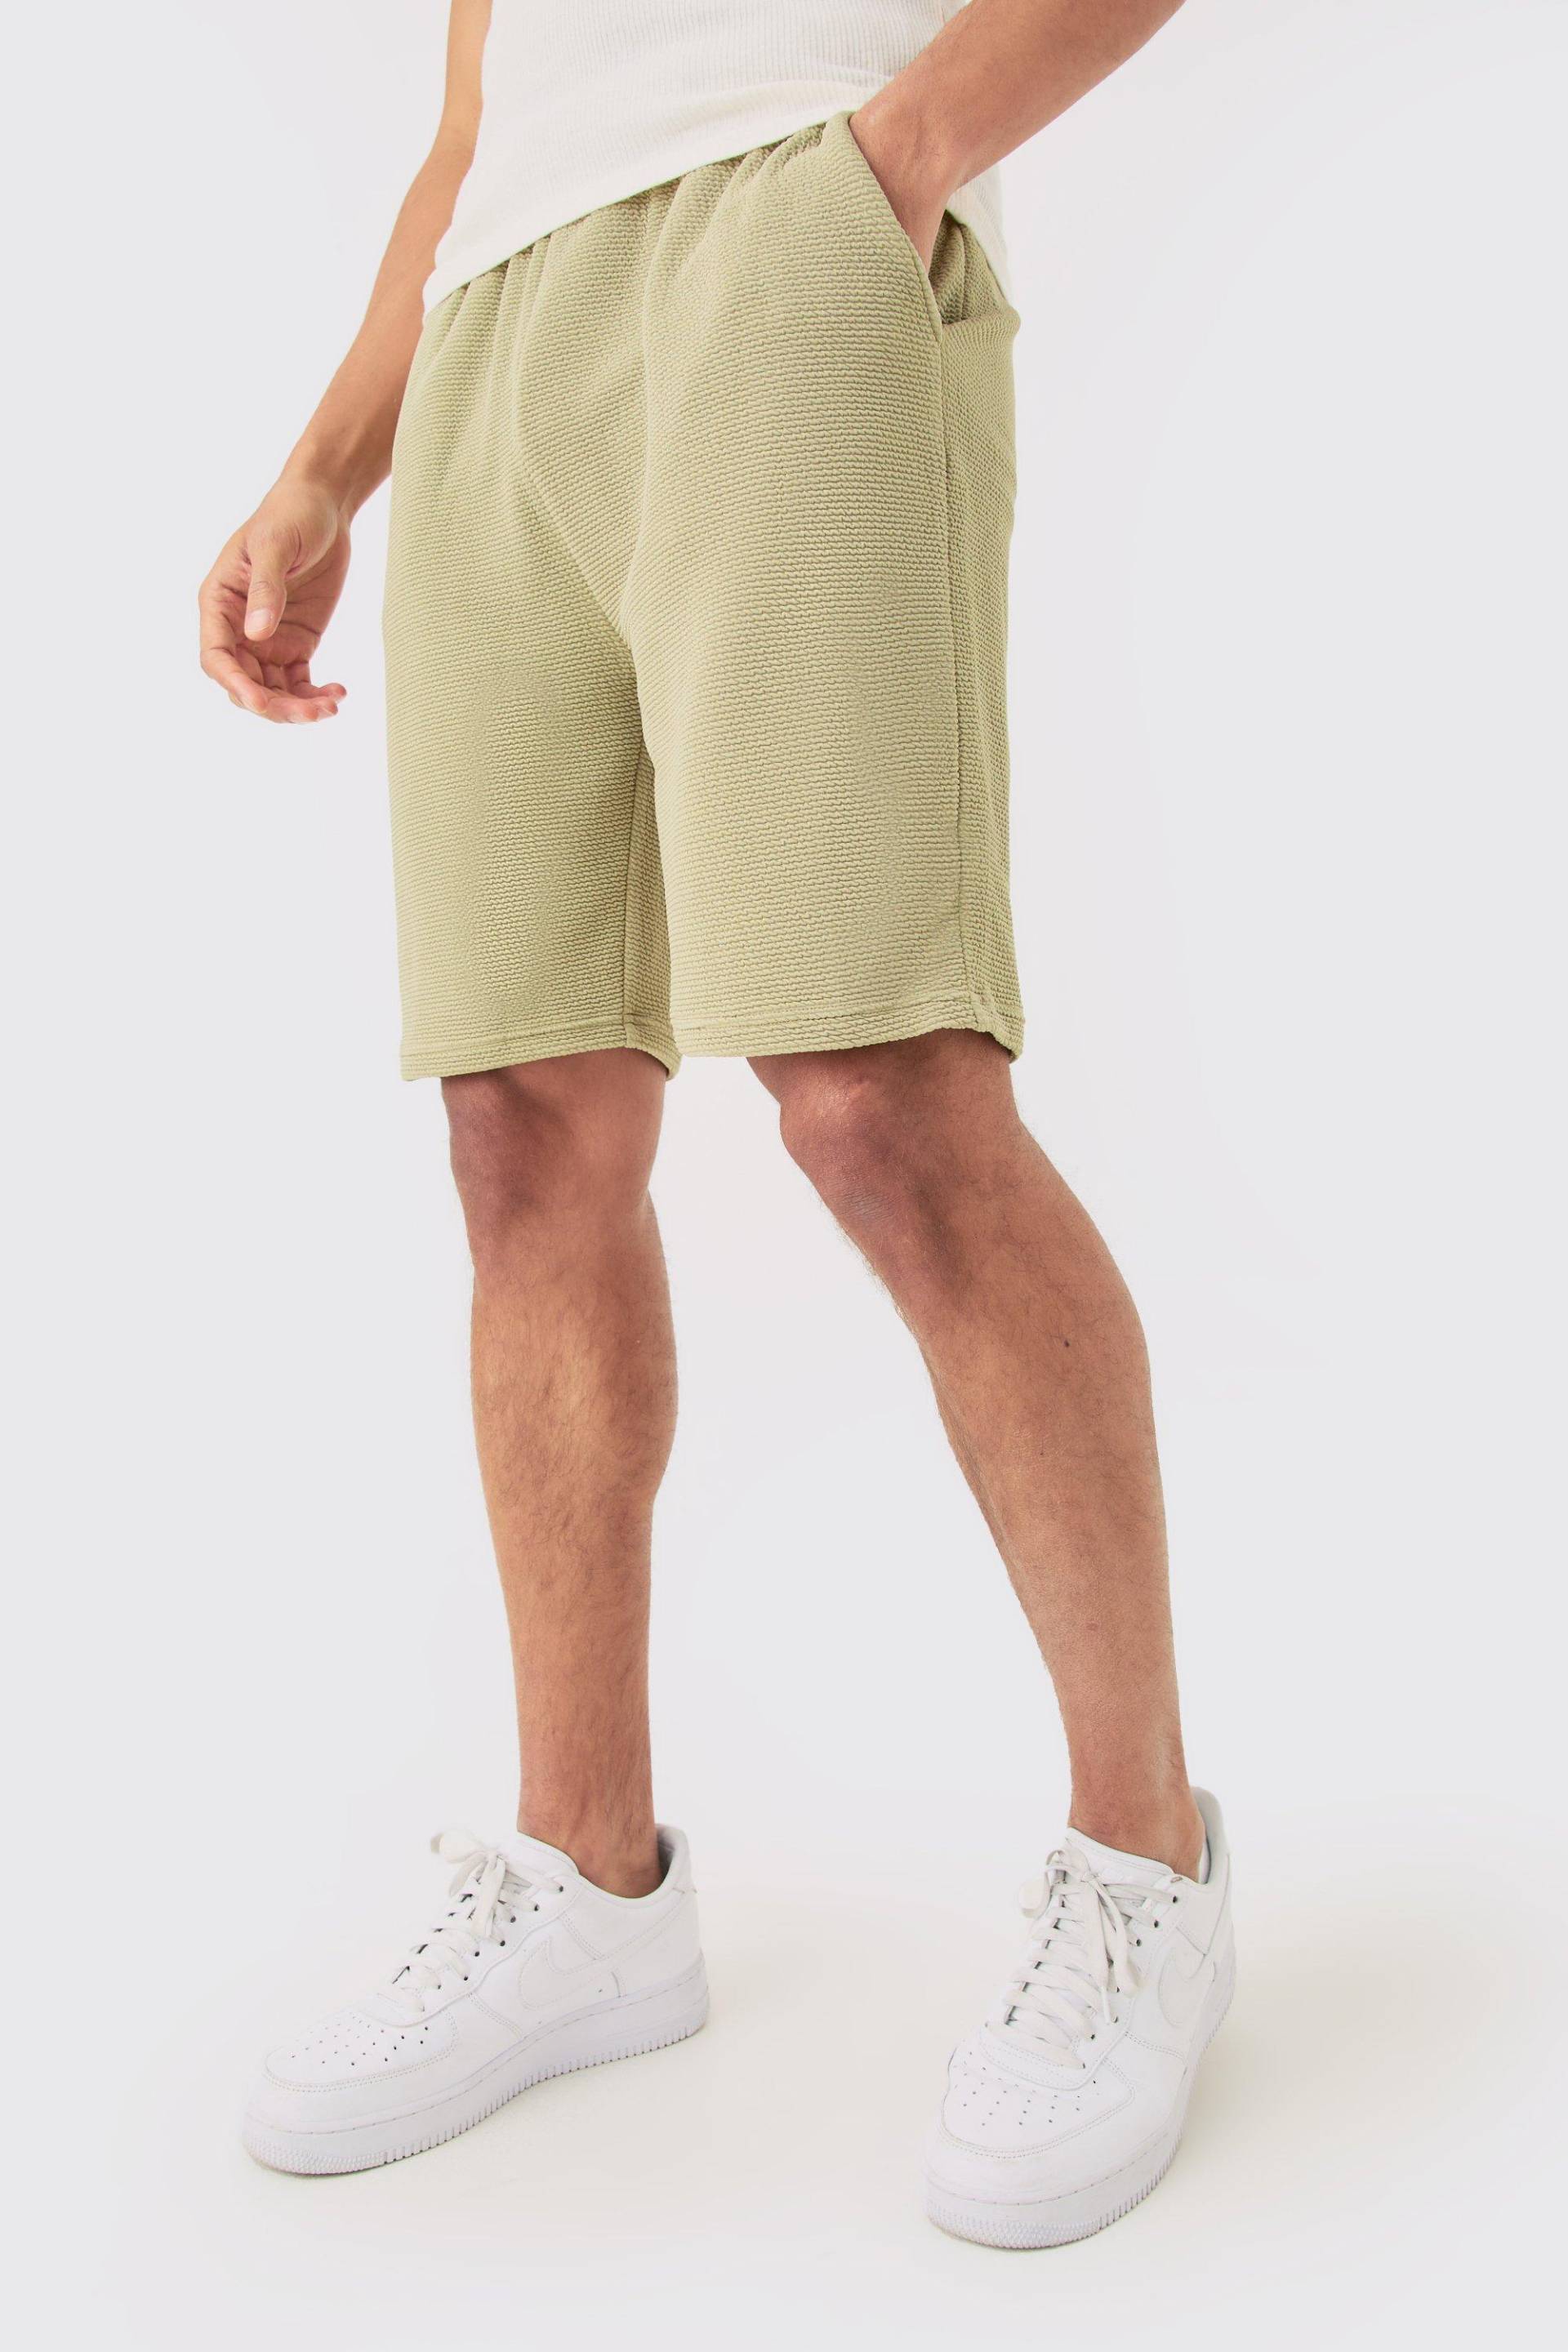 Loose Fit Mid Length Textured Shorts - Olive - S, Olive von boohoo